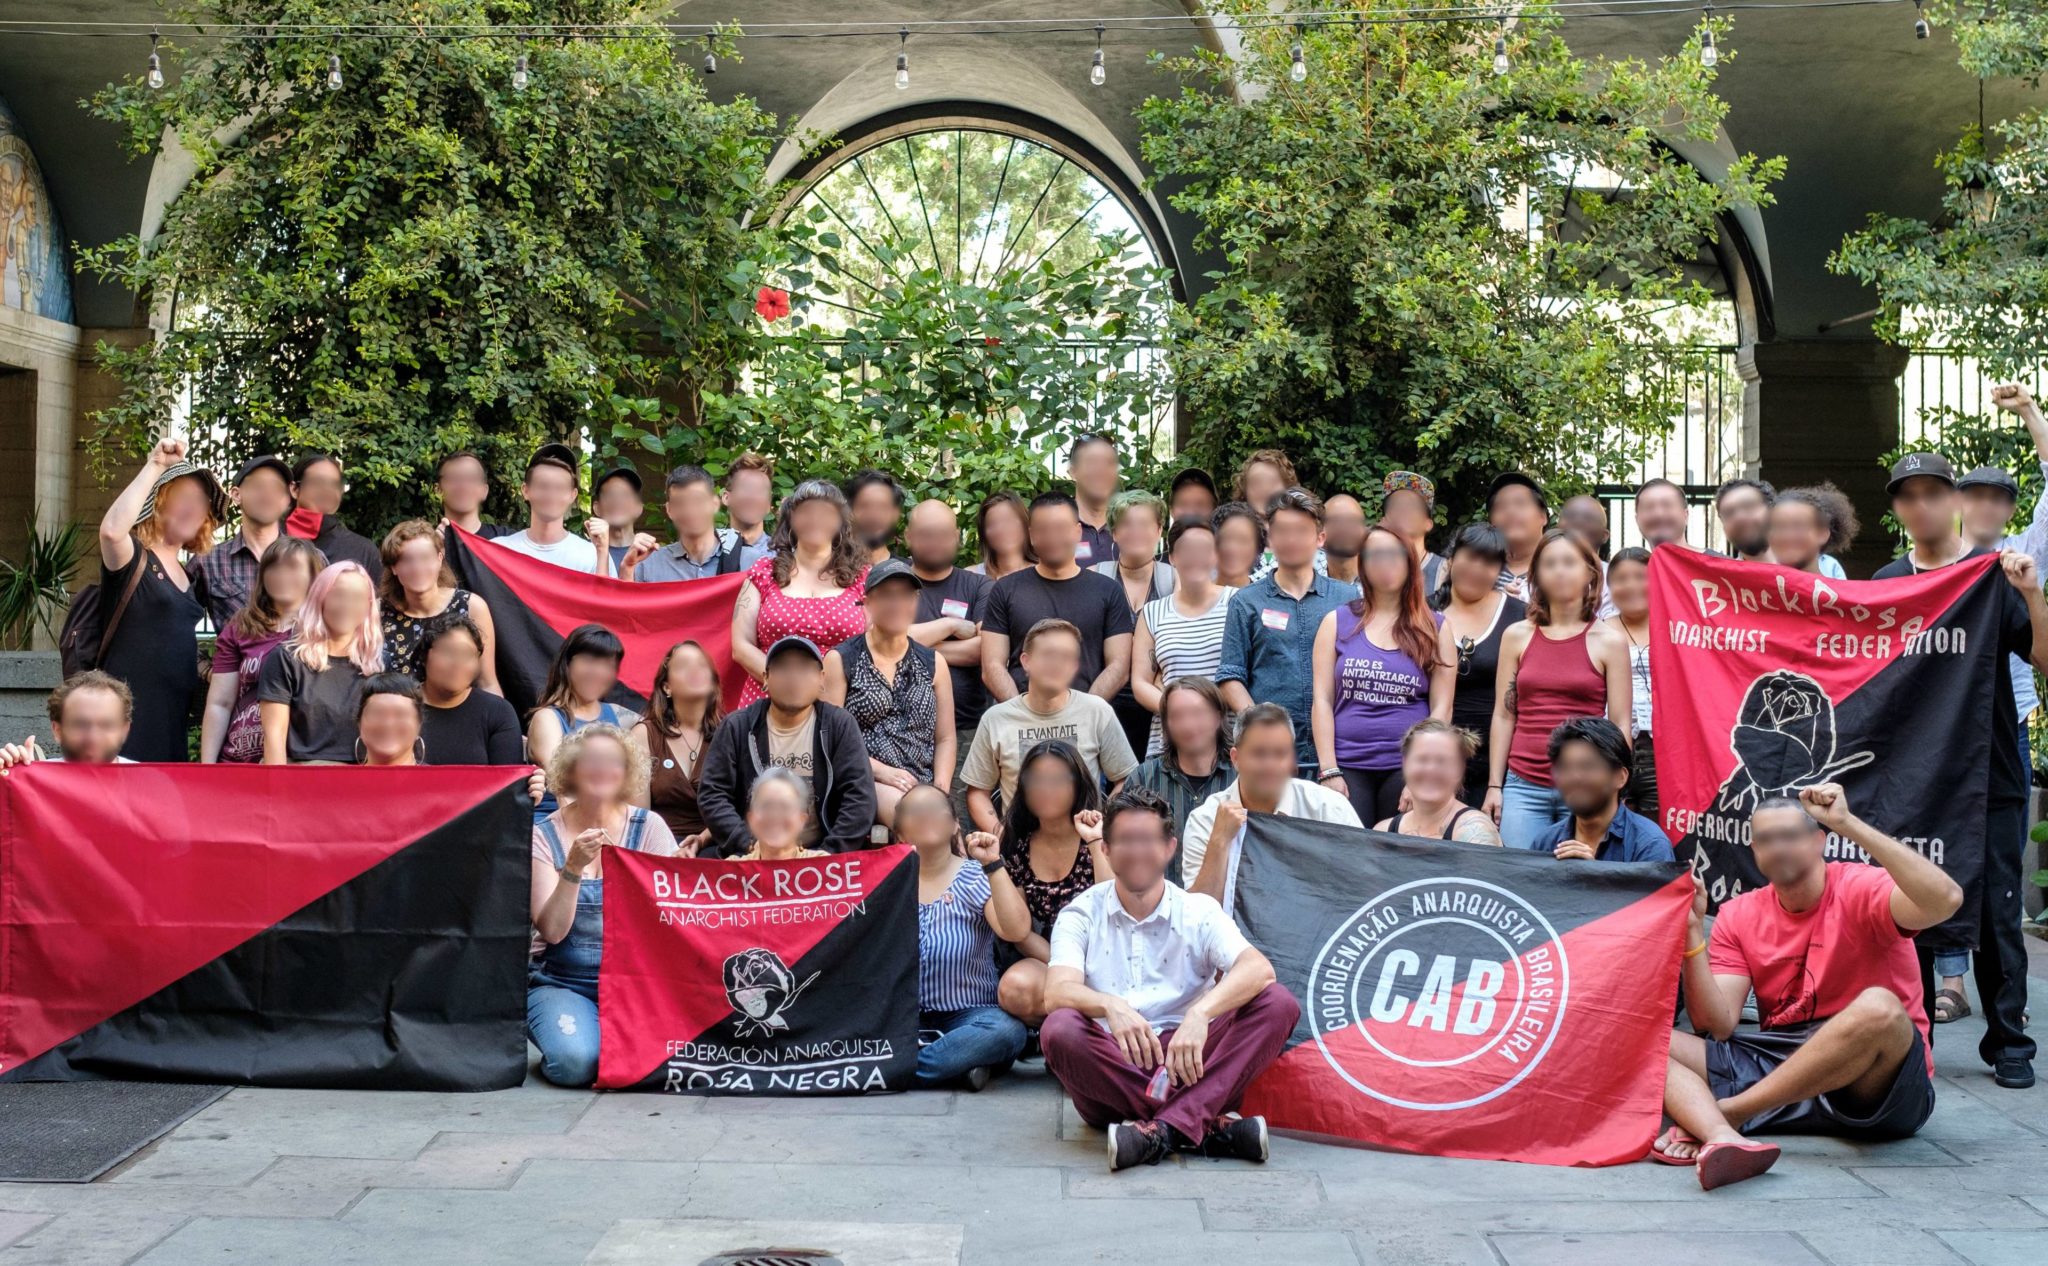 Group photo of Black Rose/Rosa Negra members at their 5th convention in Los Angeles, CA.